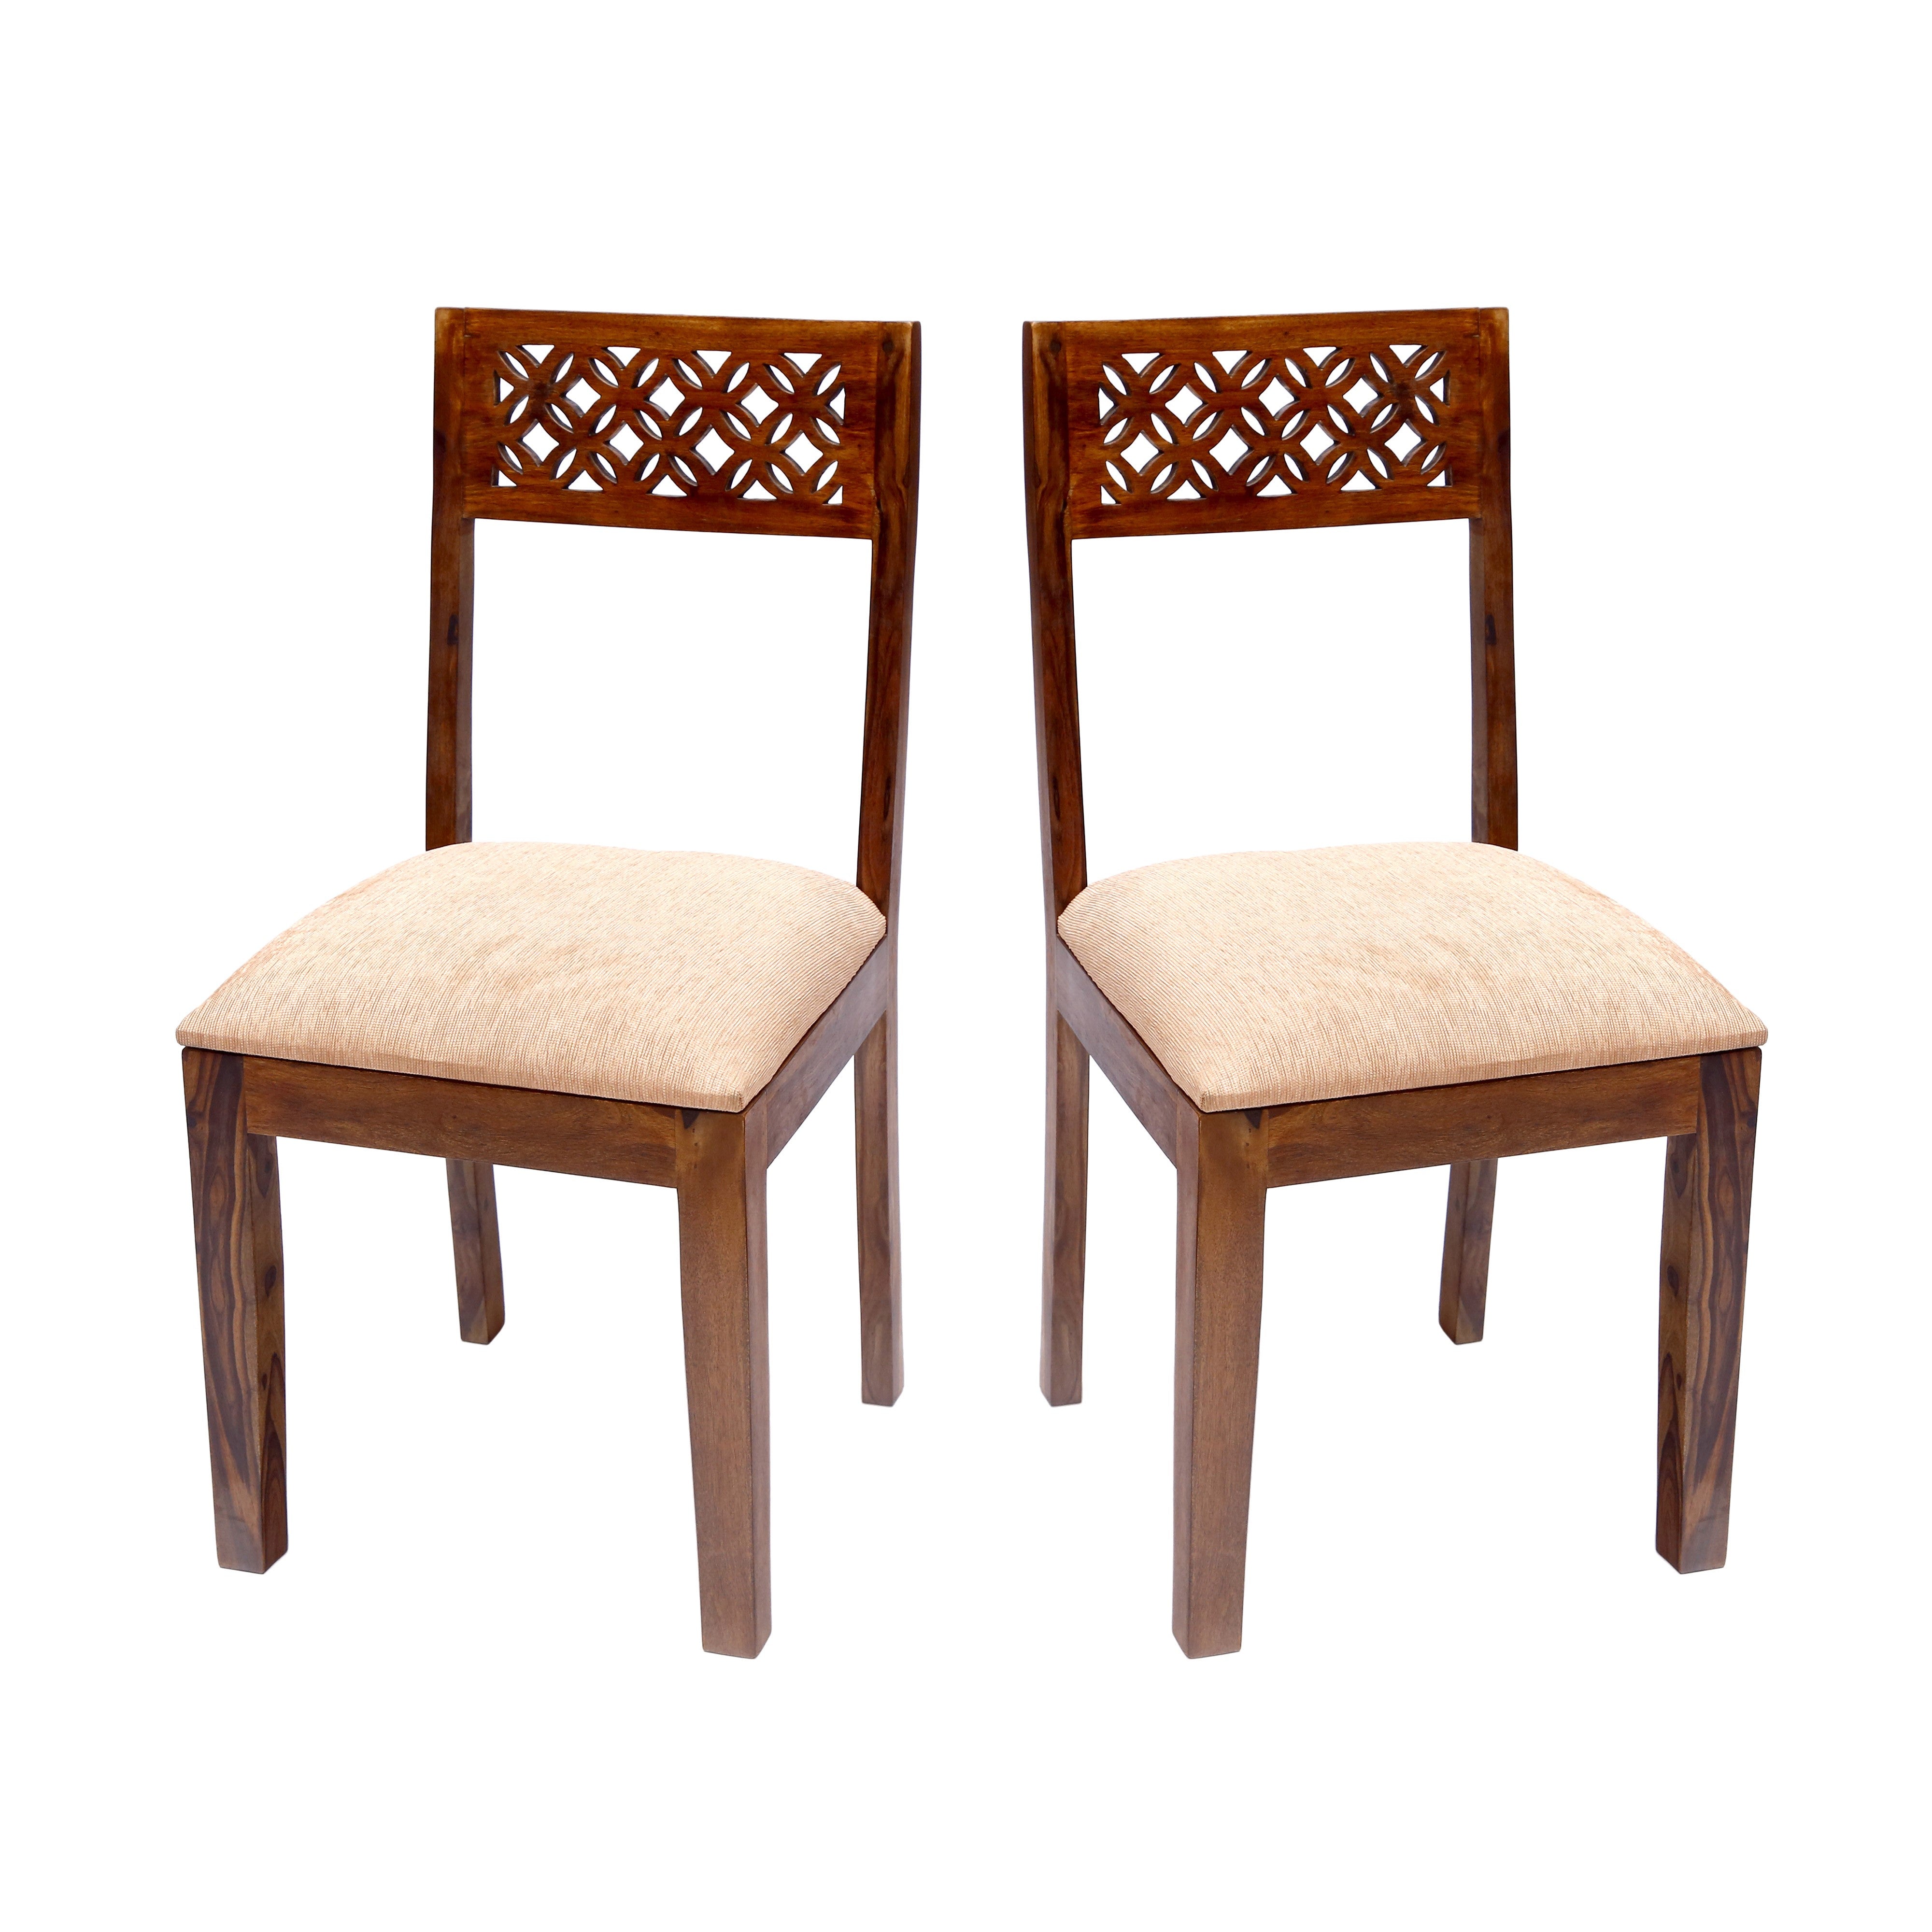 (Set of 2) Diamond shaped Dining Chair Dining Chair